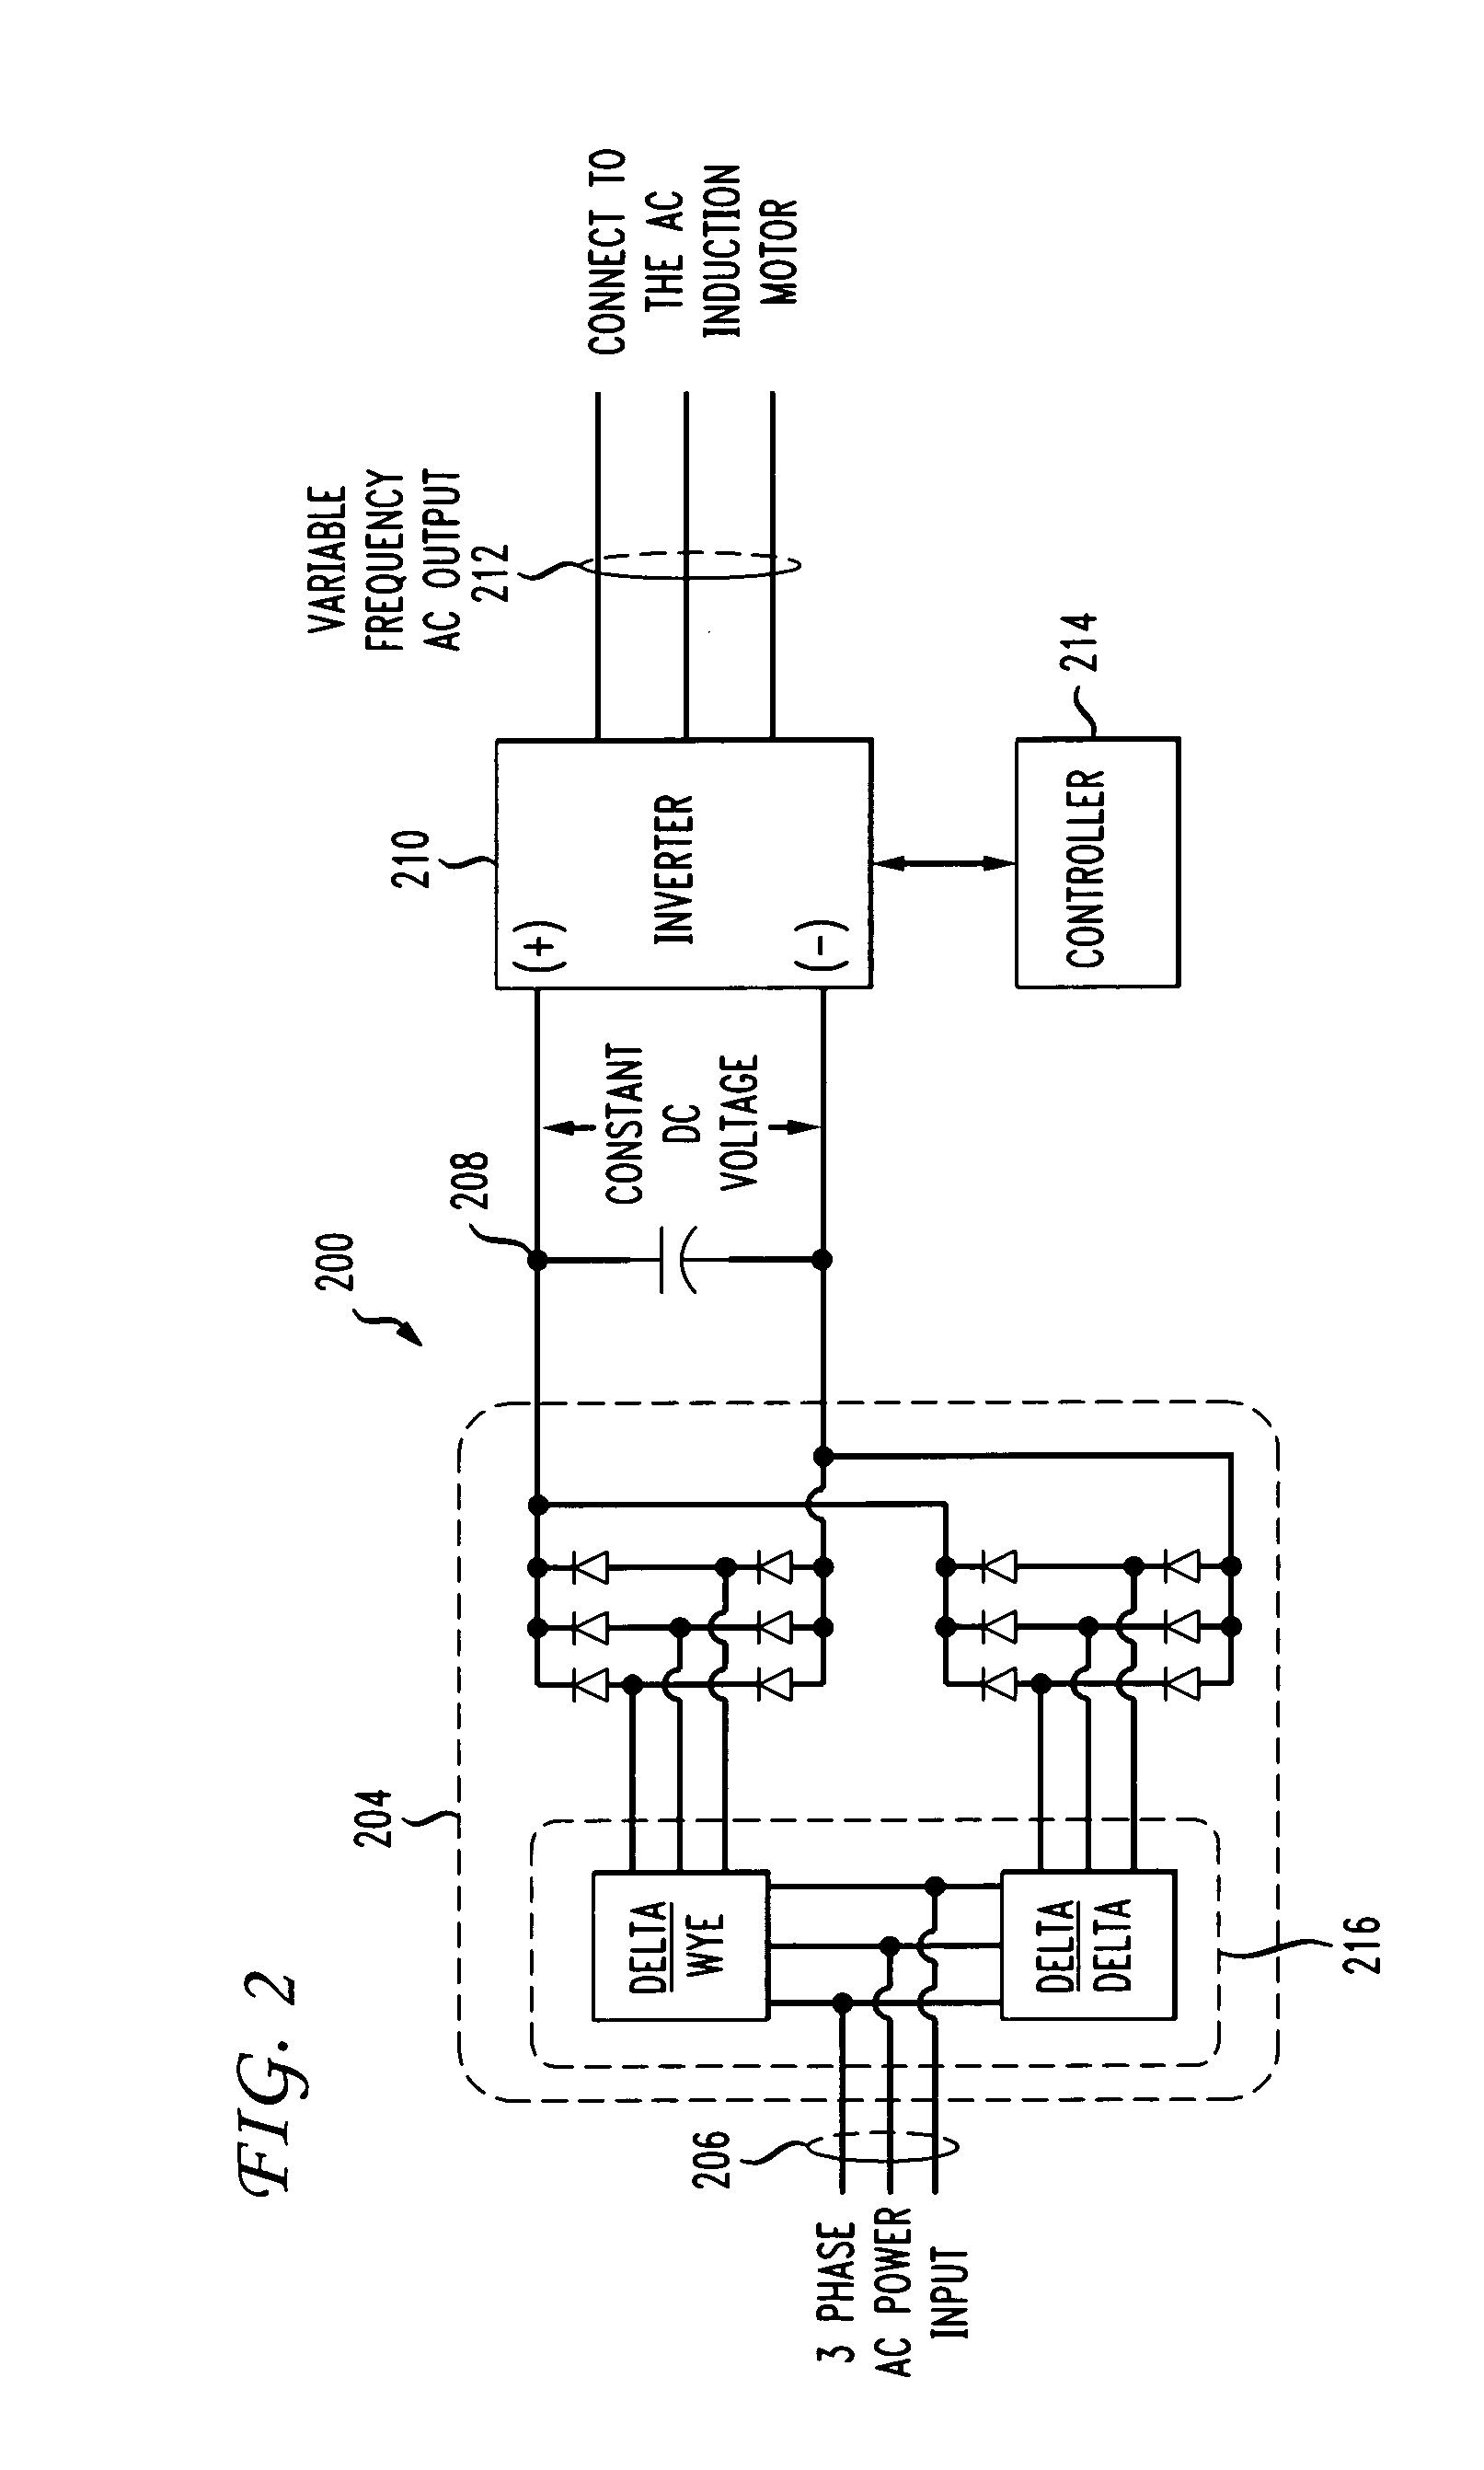 Load testing of uninterrupted power supply systems using regenerative loading by supplying percentage of a test power